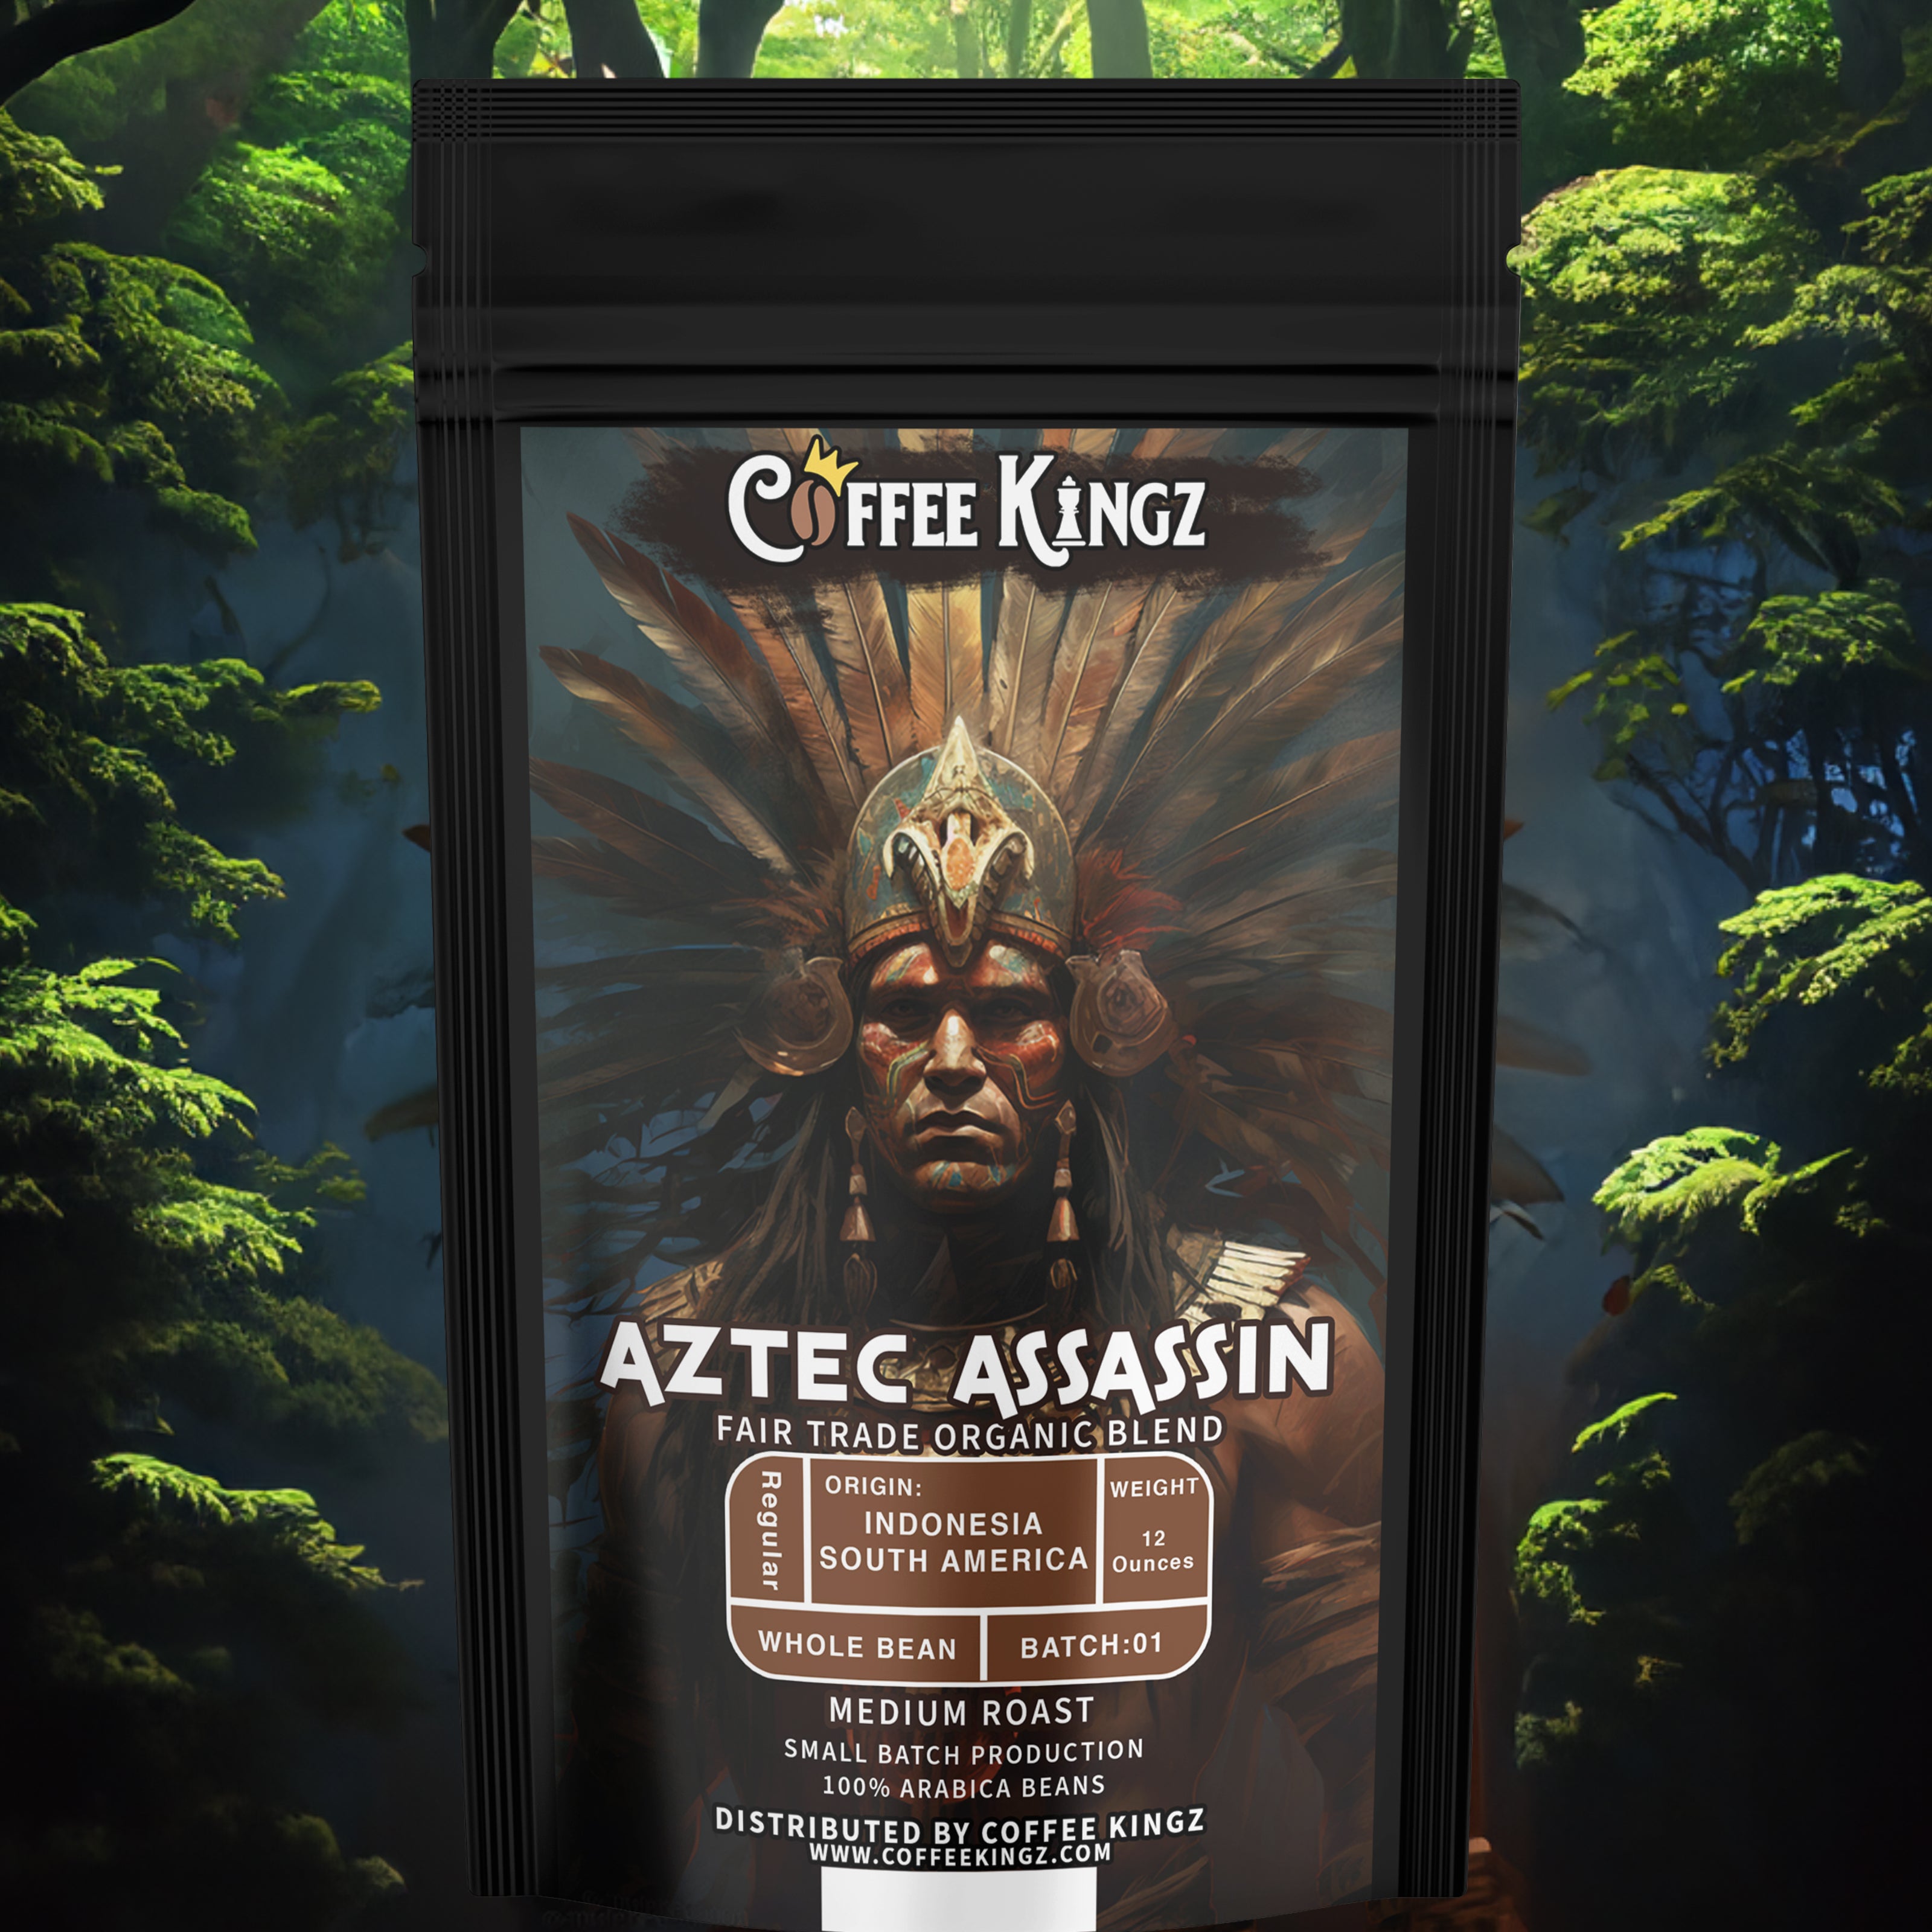 A promotional image for "coffee kingz," featuring an artistic rendition of an Aztec warrior, advertising a fair trade organic blend called "Aztec Assassin" with a bold and exotic theme.